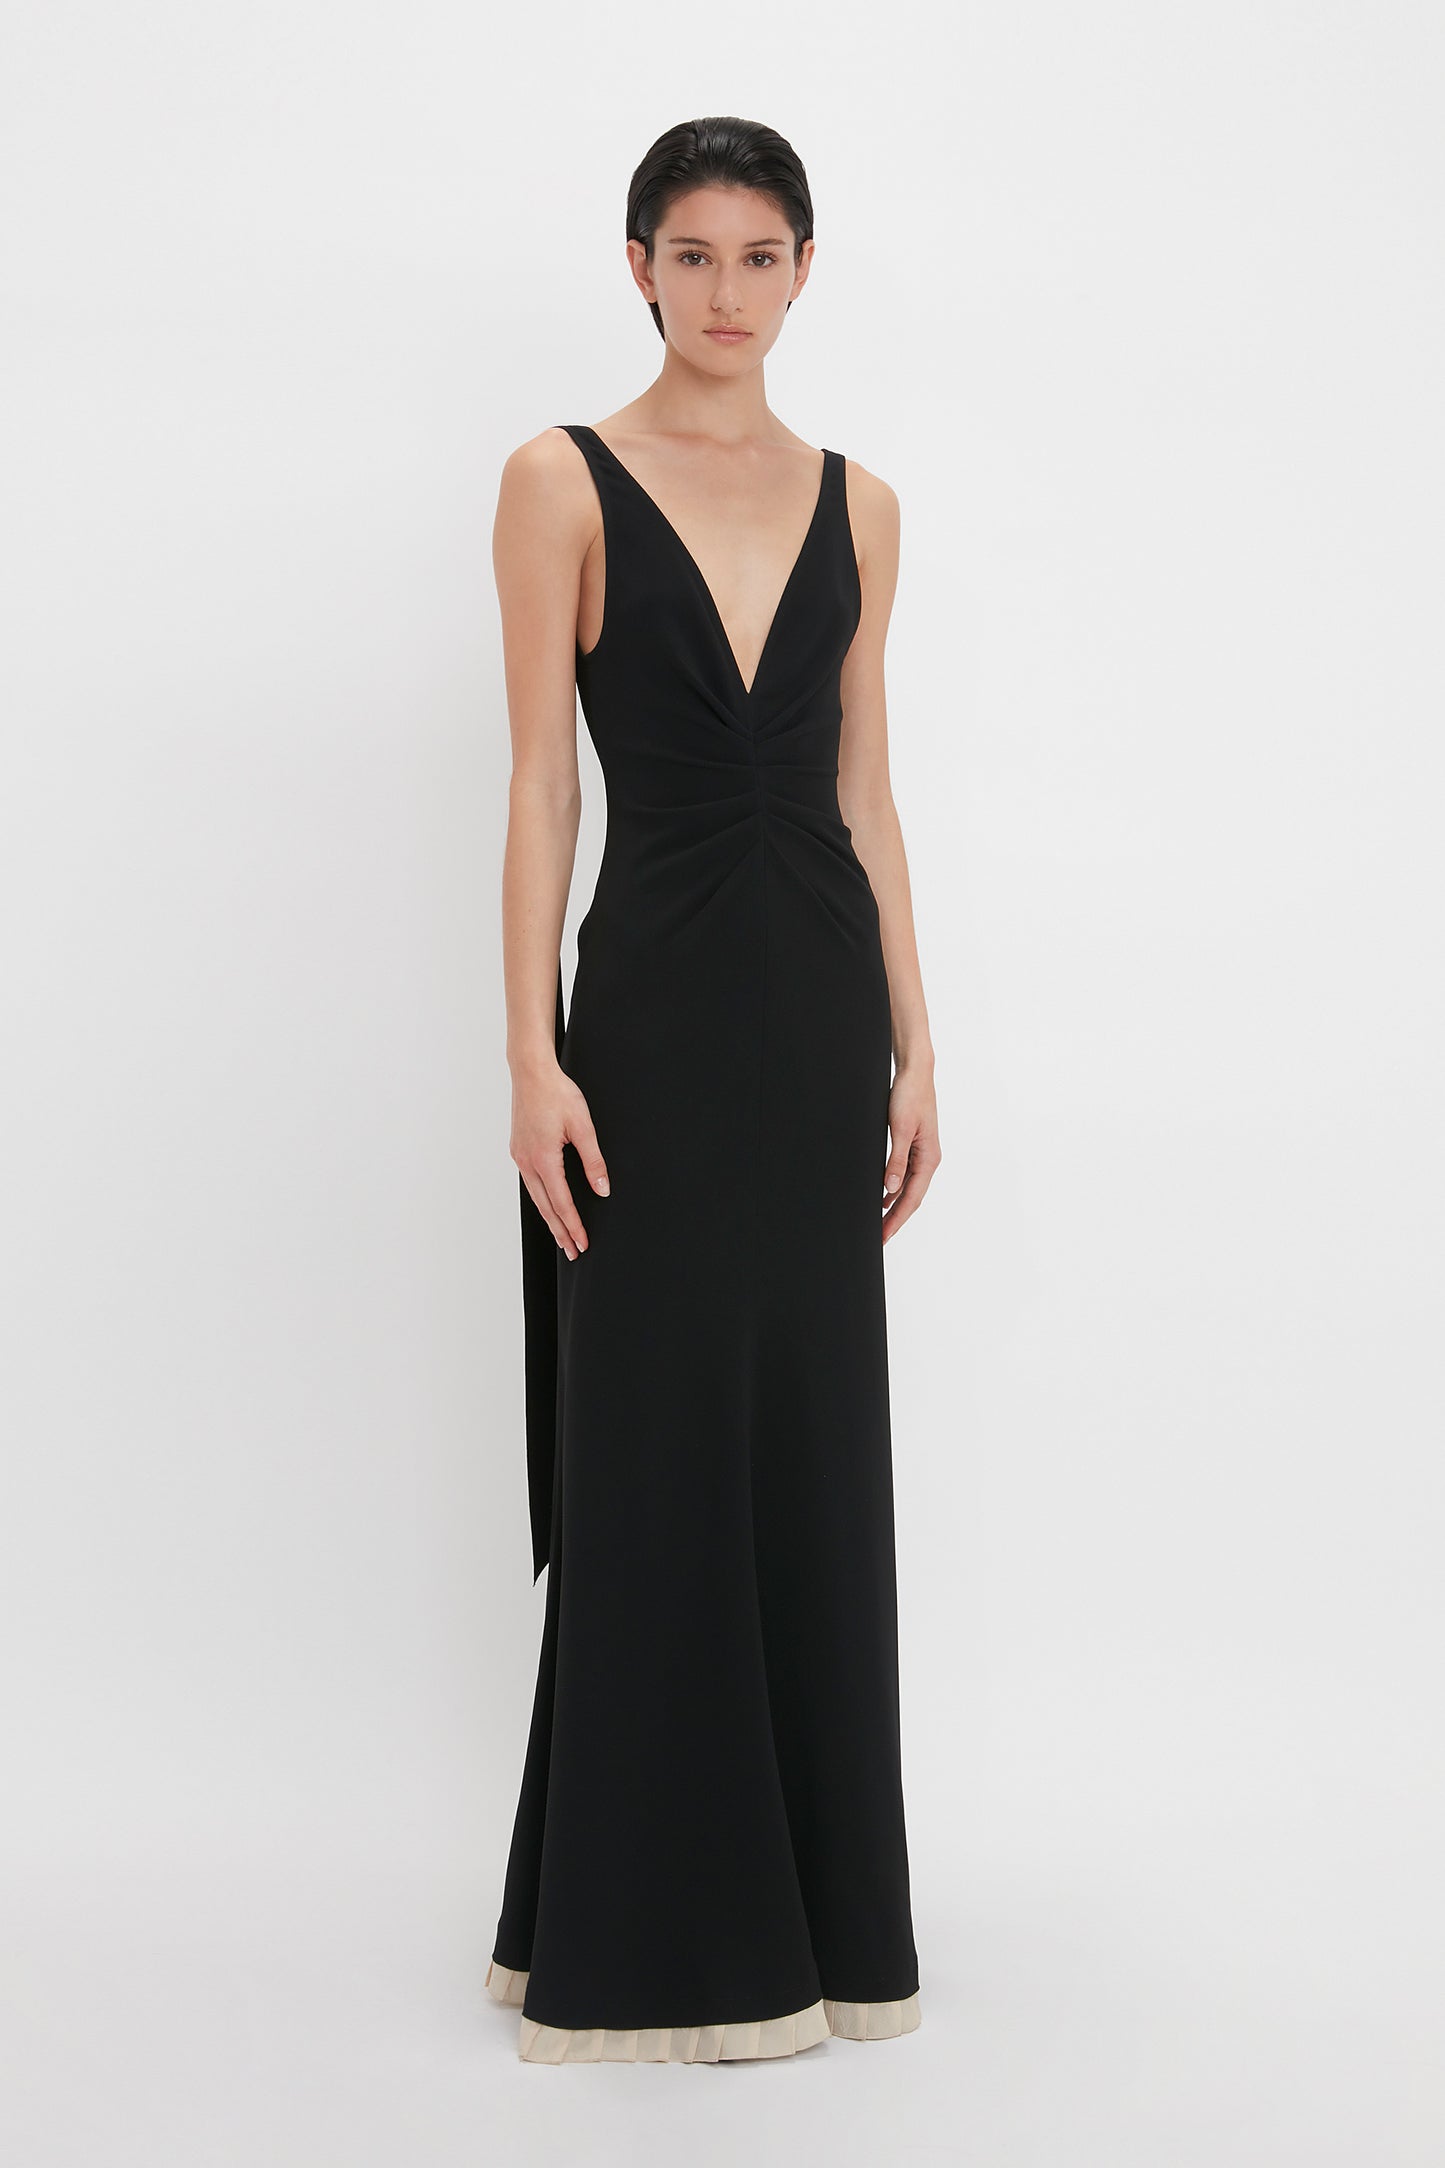 Person posing in a sleeveless, floor-length V-Neck Gathered Waist Floor-Length Gown In Black by Victoria Beckham against a plain white background, accentuating a deep-V neckline and flattering silhouette.